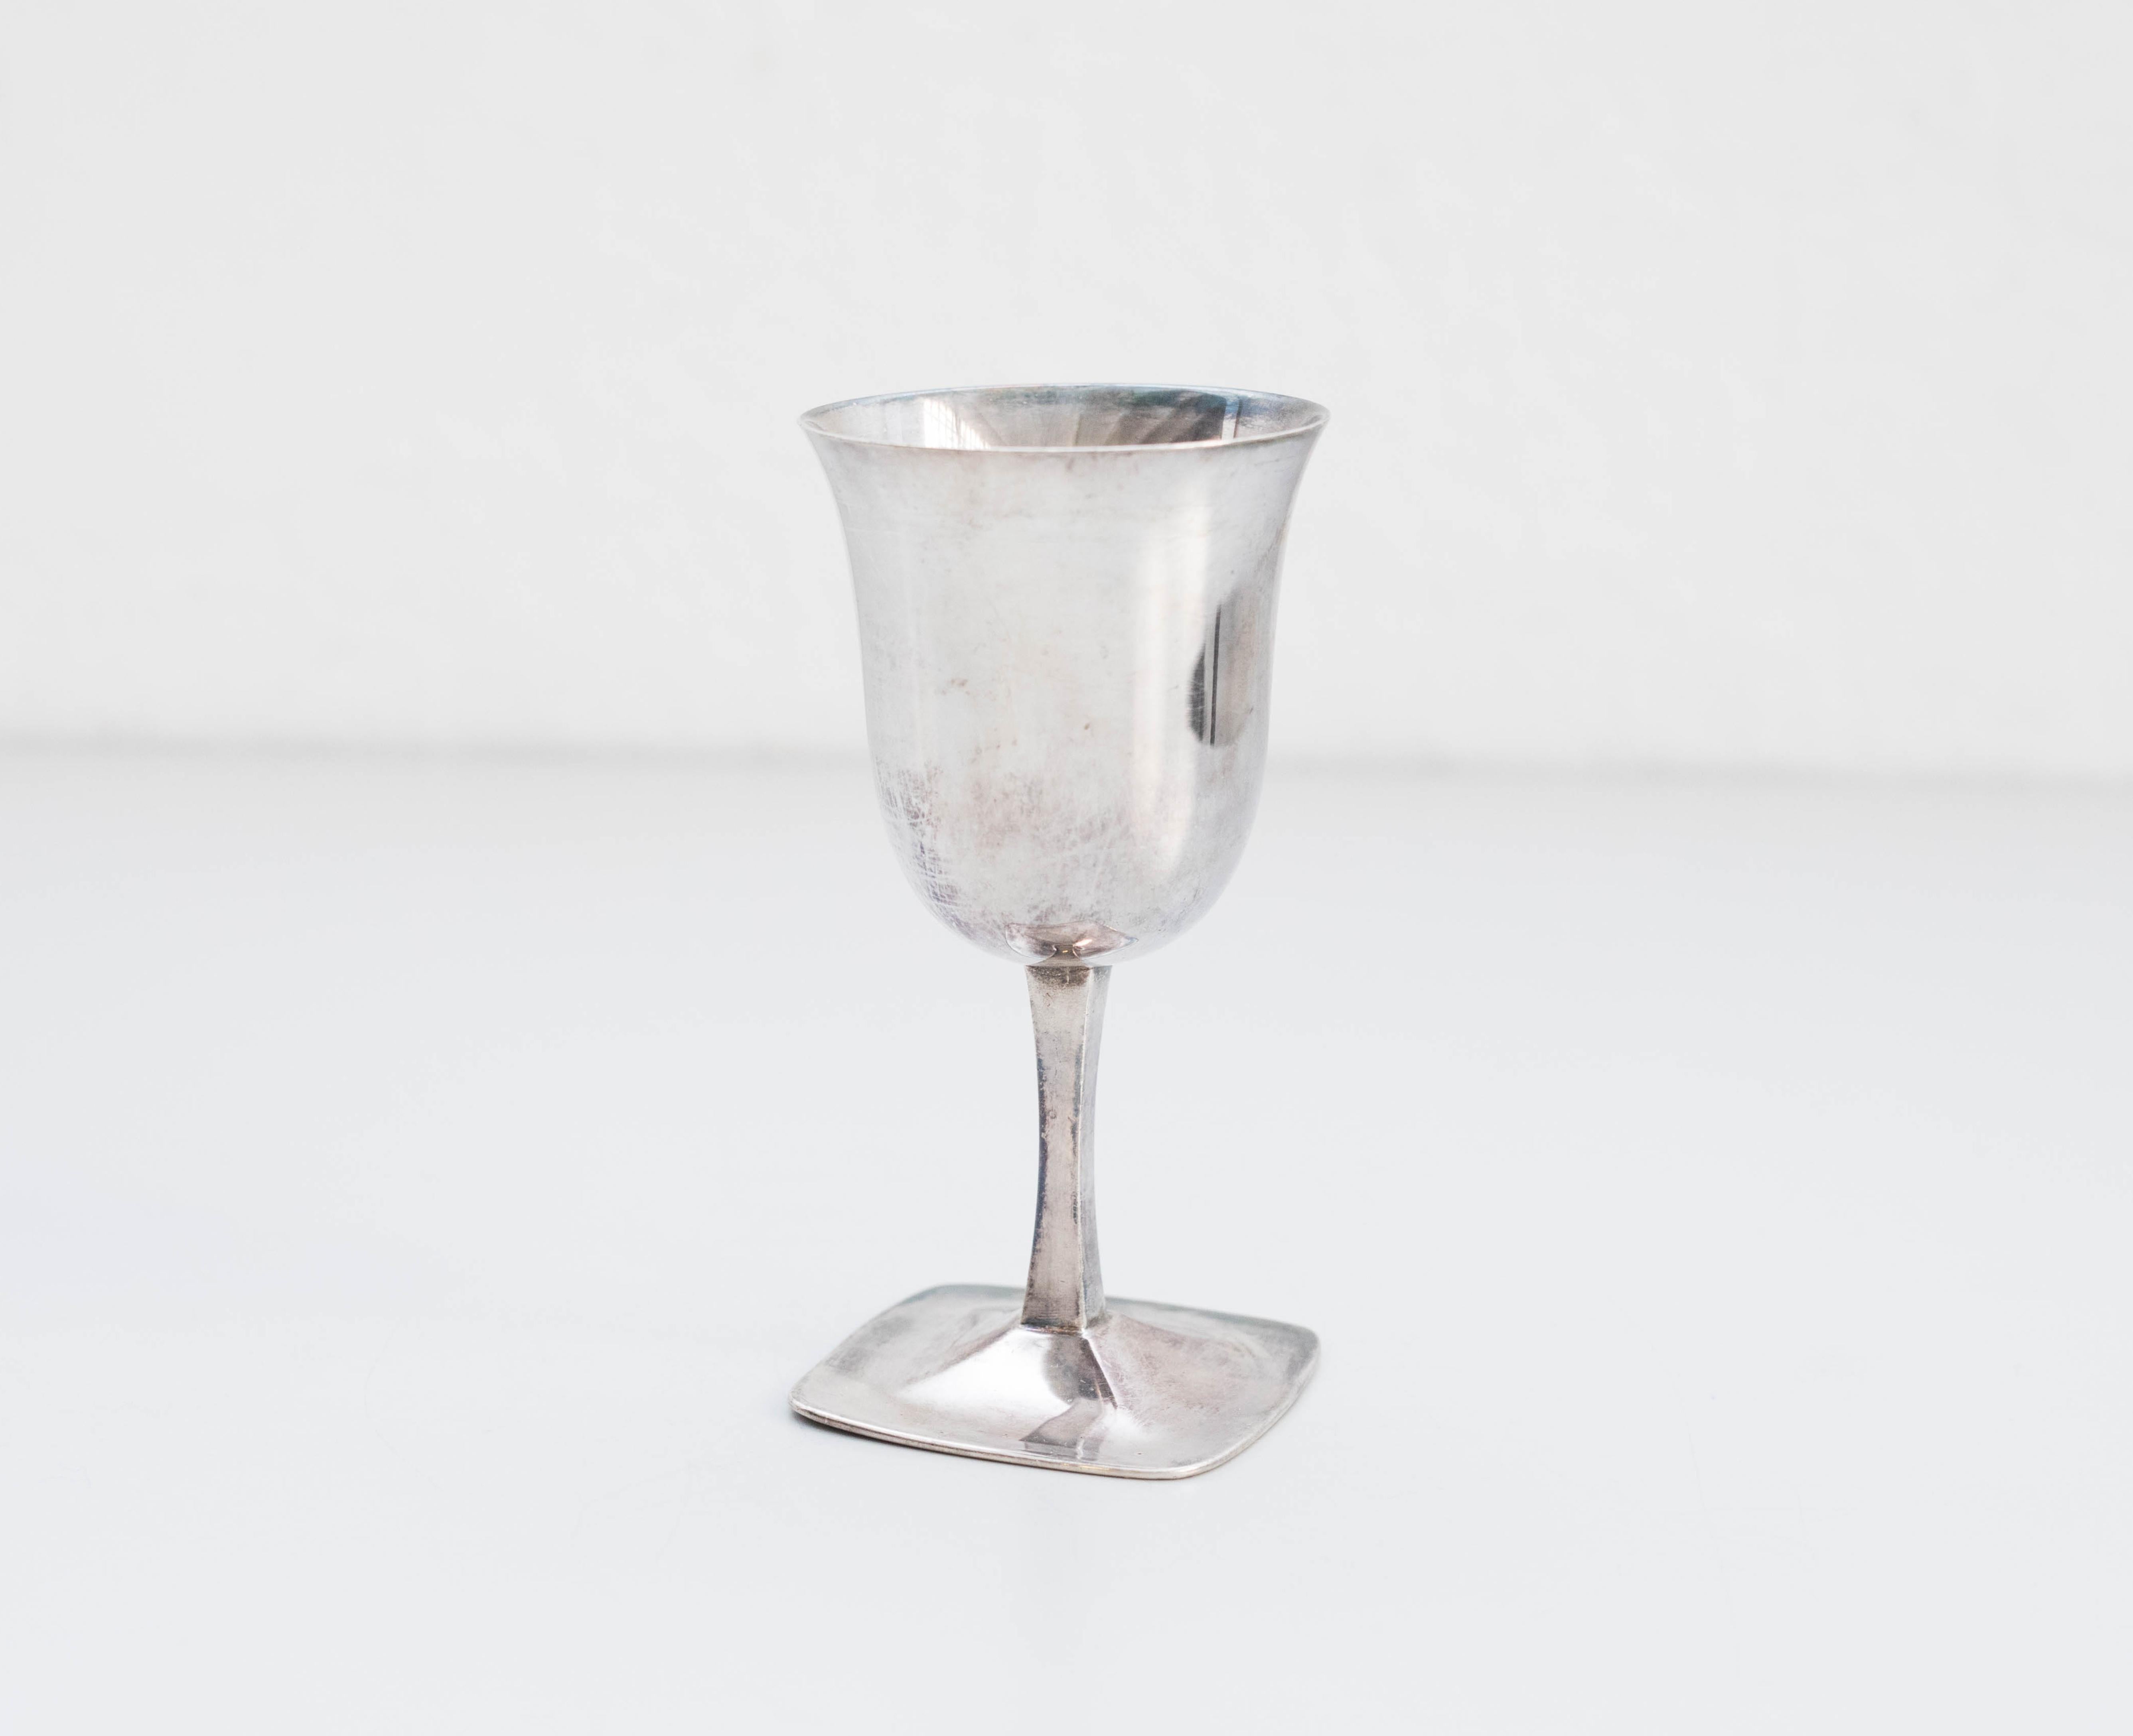 Early 20th metal chalice.
by unknown manufacturer, Spain.

In original condition, with minor wear consistent with age and use, preserving a beautiful patina.



Dimensions:
Ø 9 cm x H 15 cm.